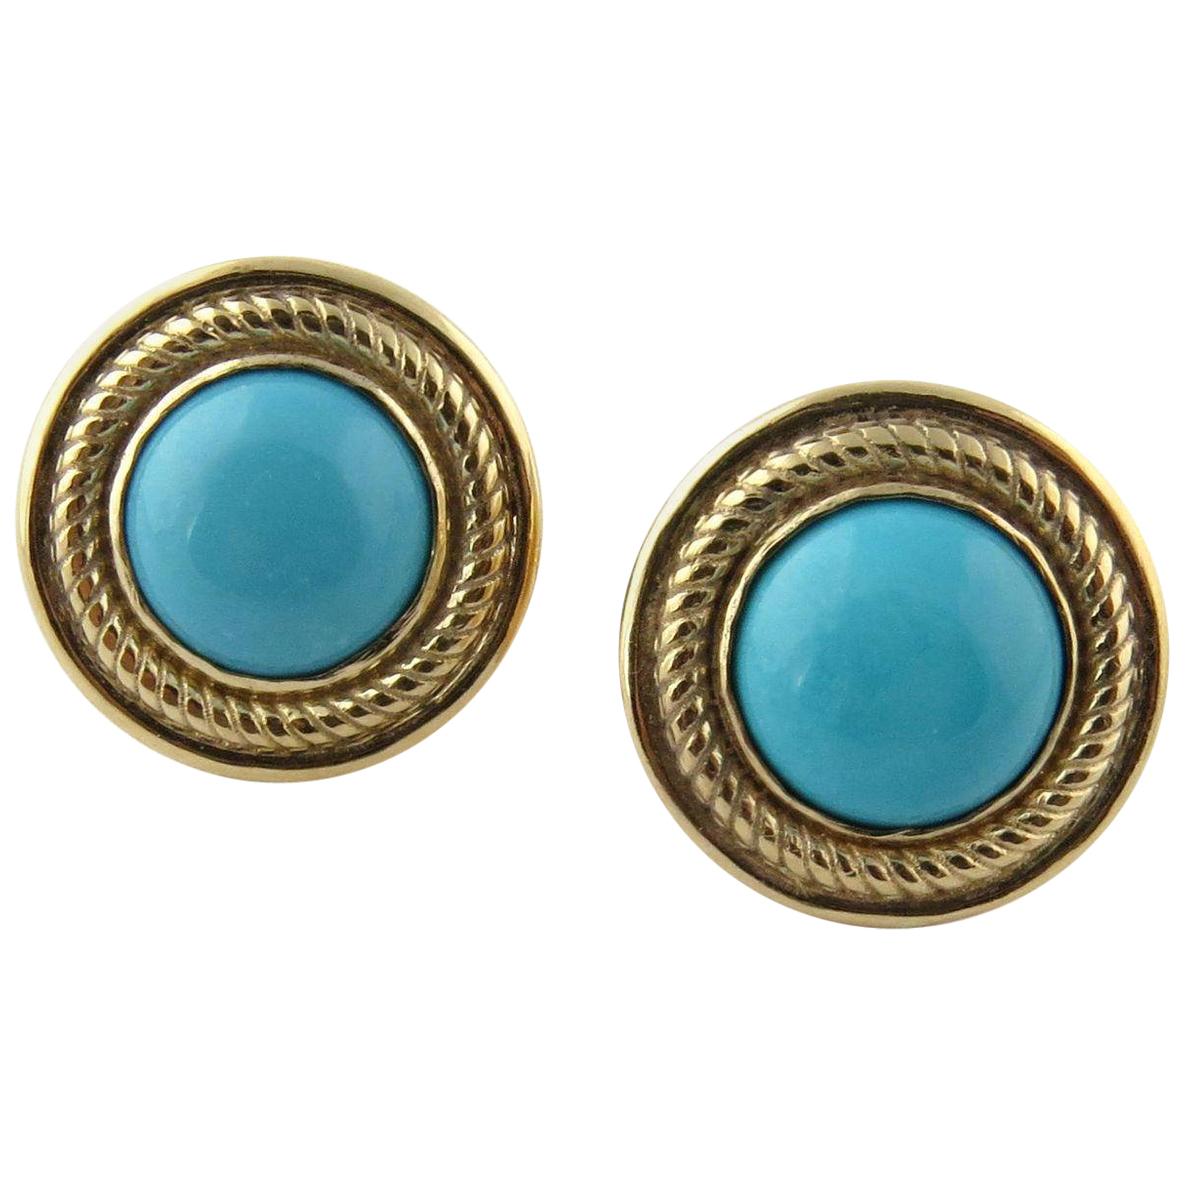 14 Karat Yellow Gold and Cabochon Turquoise Button Earrings